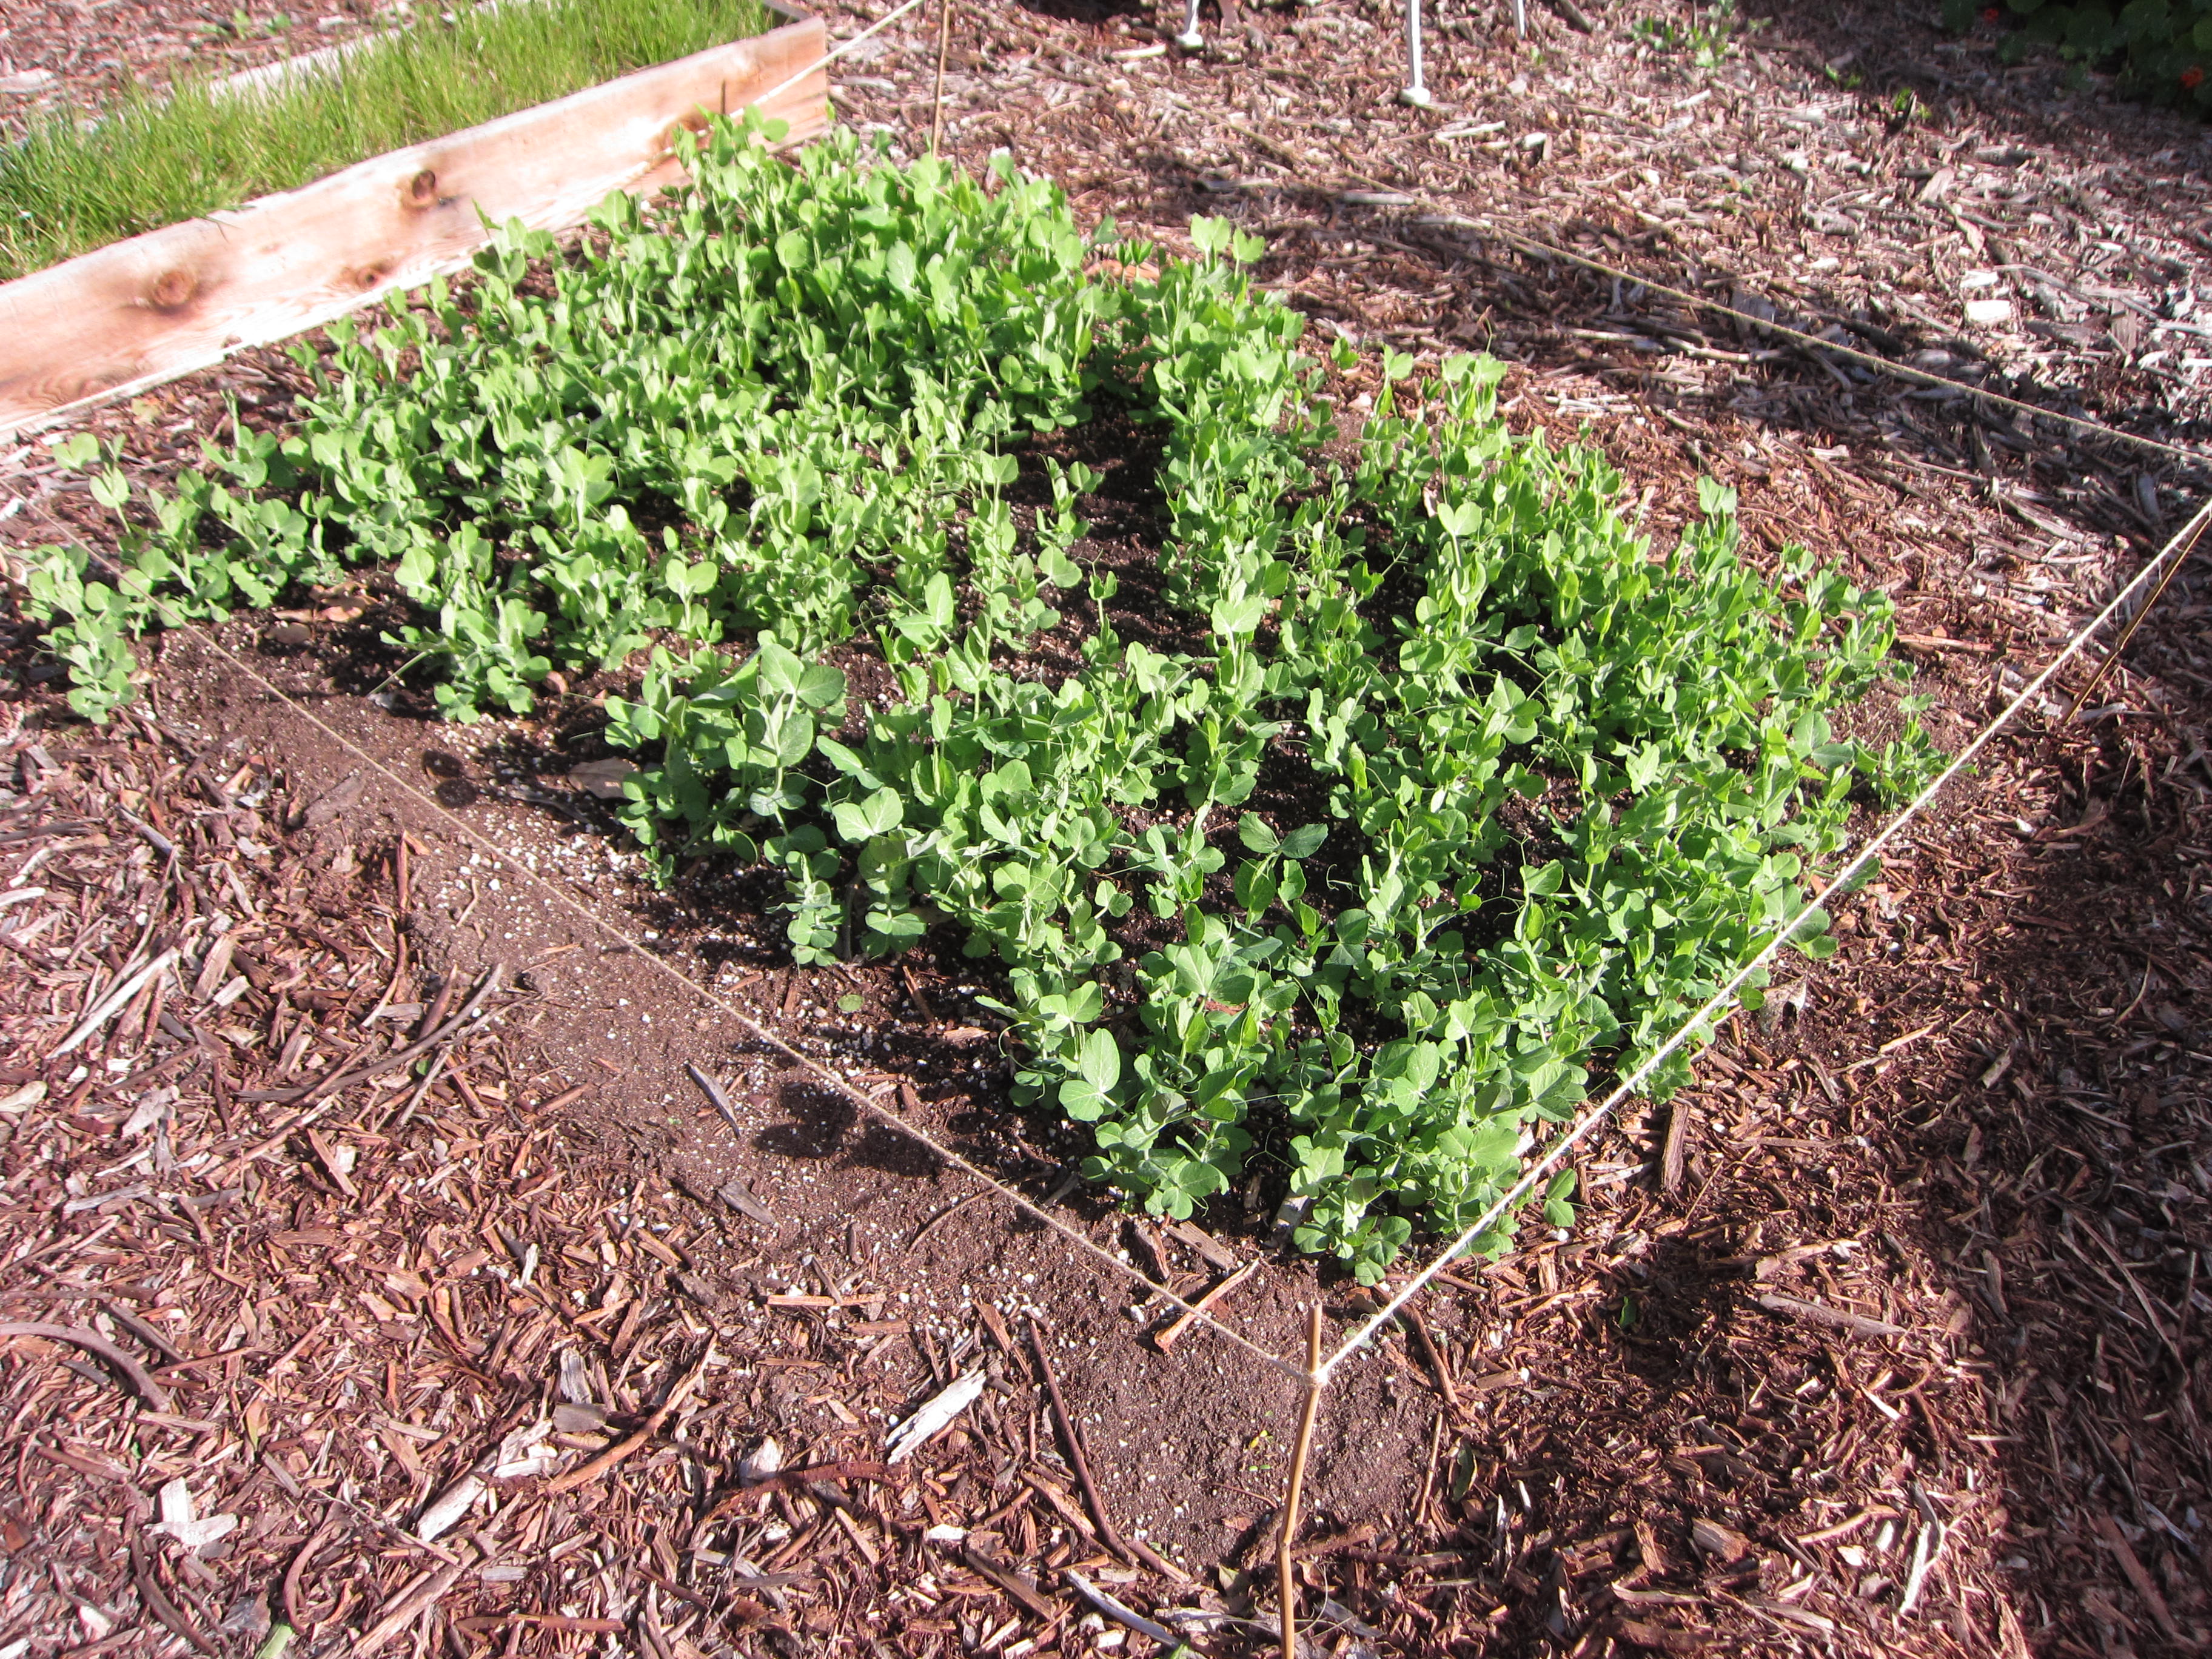 Shelling peas thrive in a new patch of soil. We're slowly taking over the yard. >